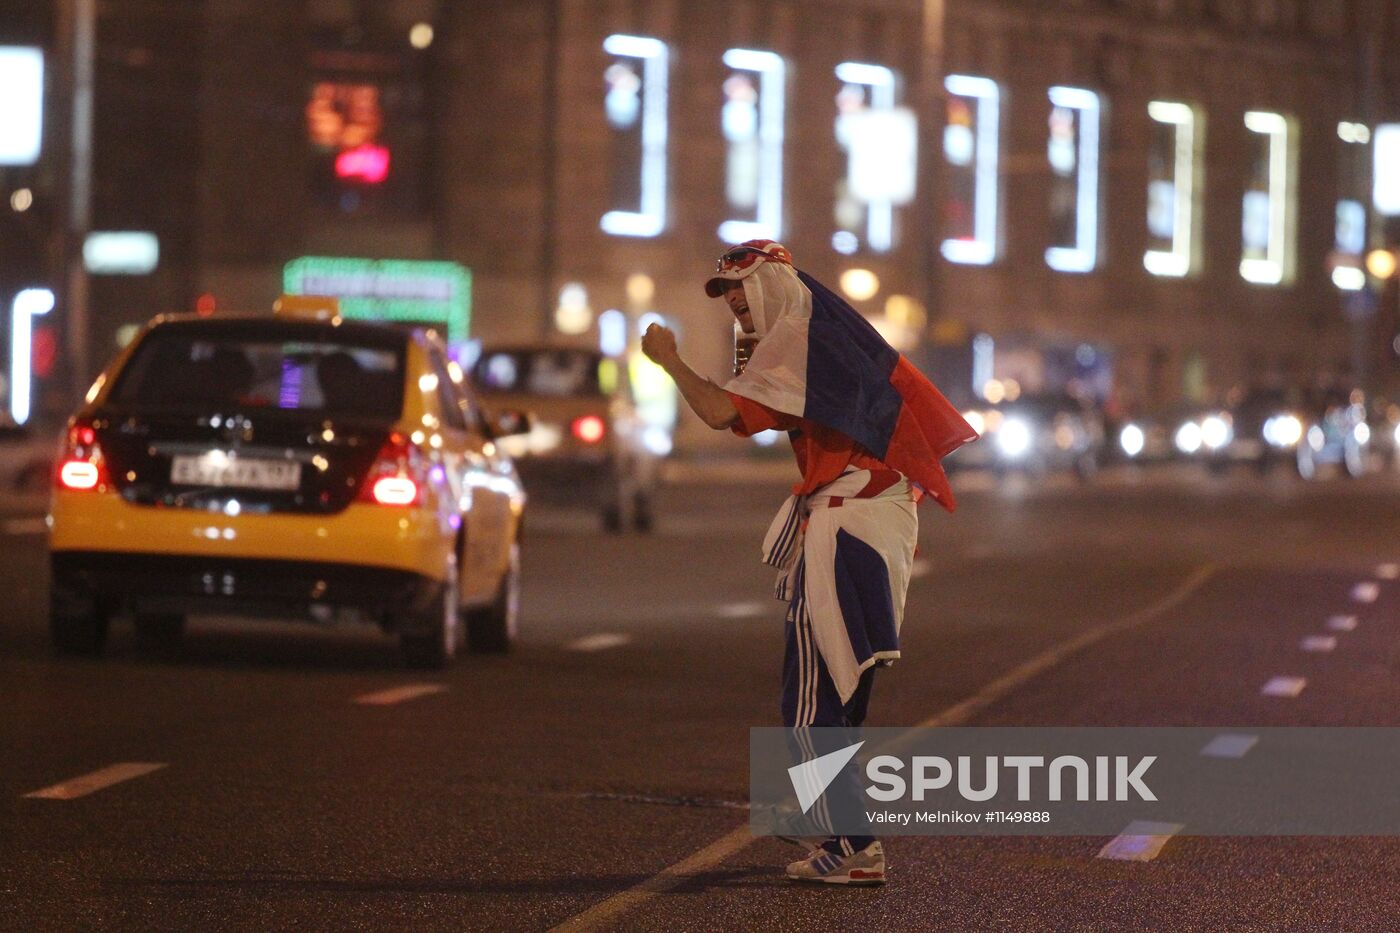 Celebrating victory of Russian football team in Moscow streets